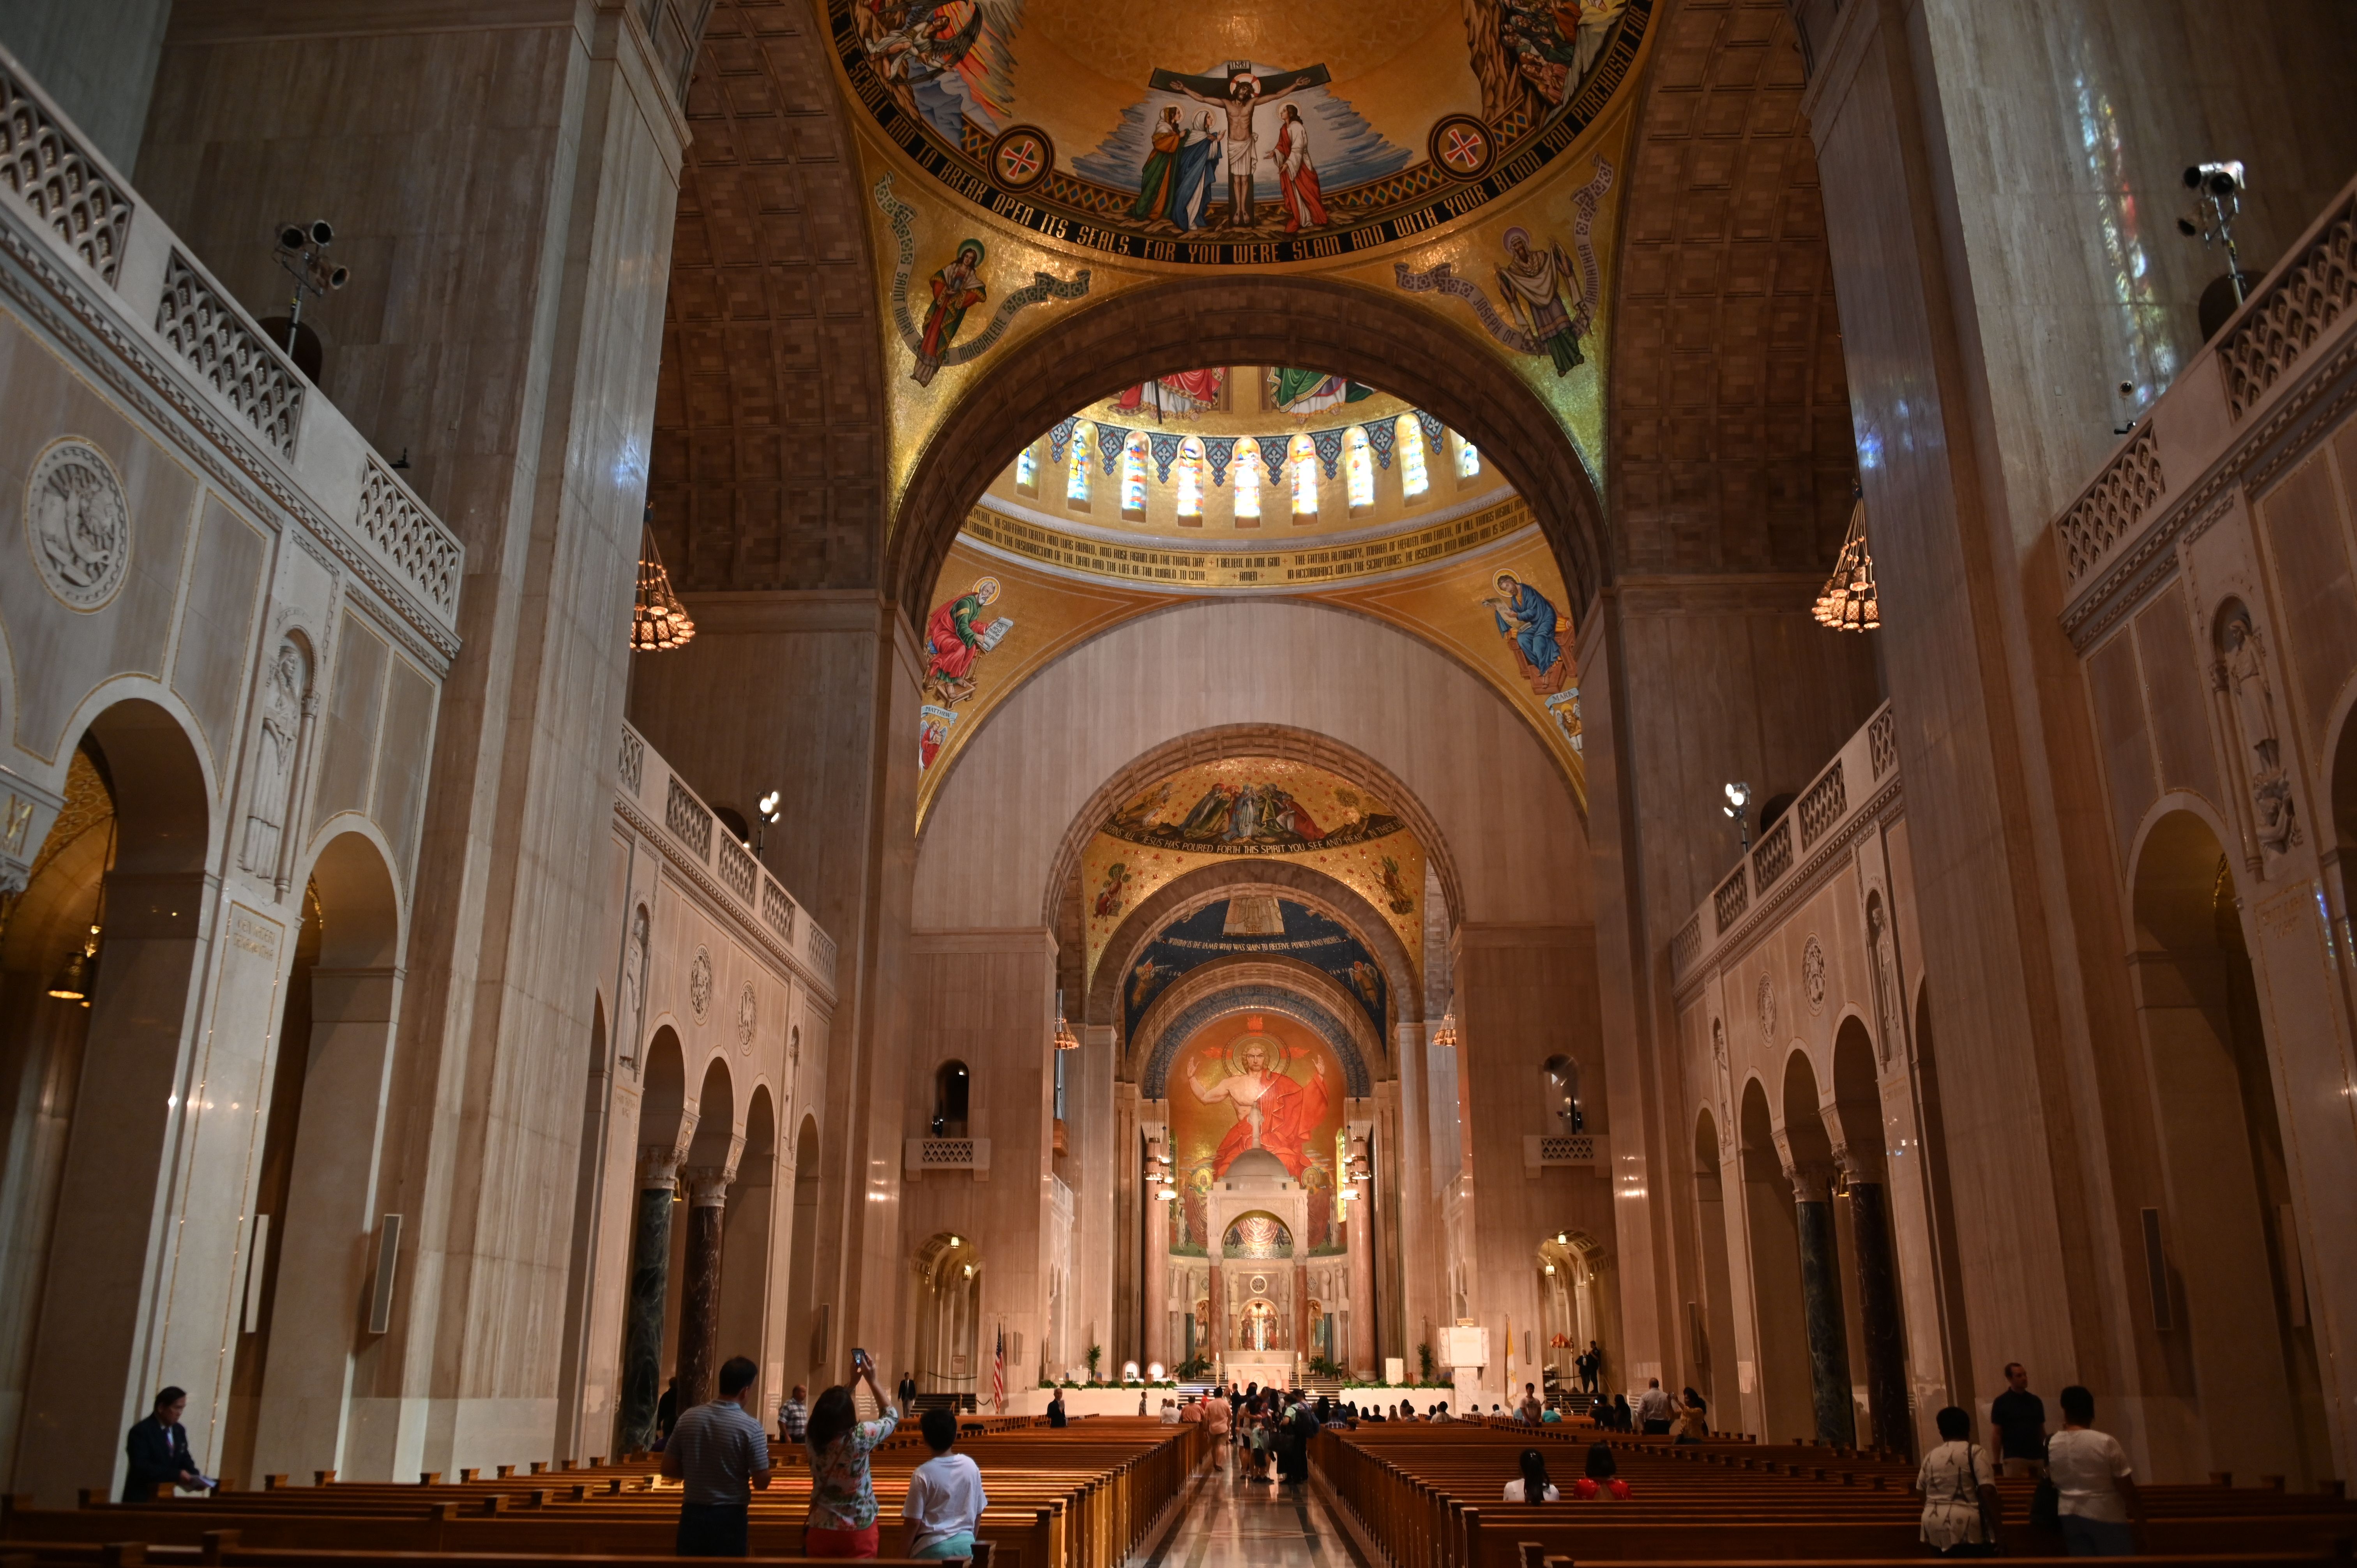 The interior of the Basilica of the National Shrine of the Immaculate Conception is viewed on July 21, 2019 in Washington,DC. - The National shrine is the largest Catholic church in the United States and in North America, and the tallest habitable building in Washington, D.C. (Photo by Daniel SLIM / AFP) (Photo credit should read DANIEL SLIM/AFP via Getty Images)